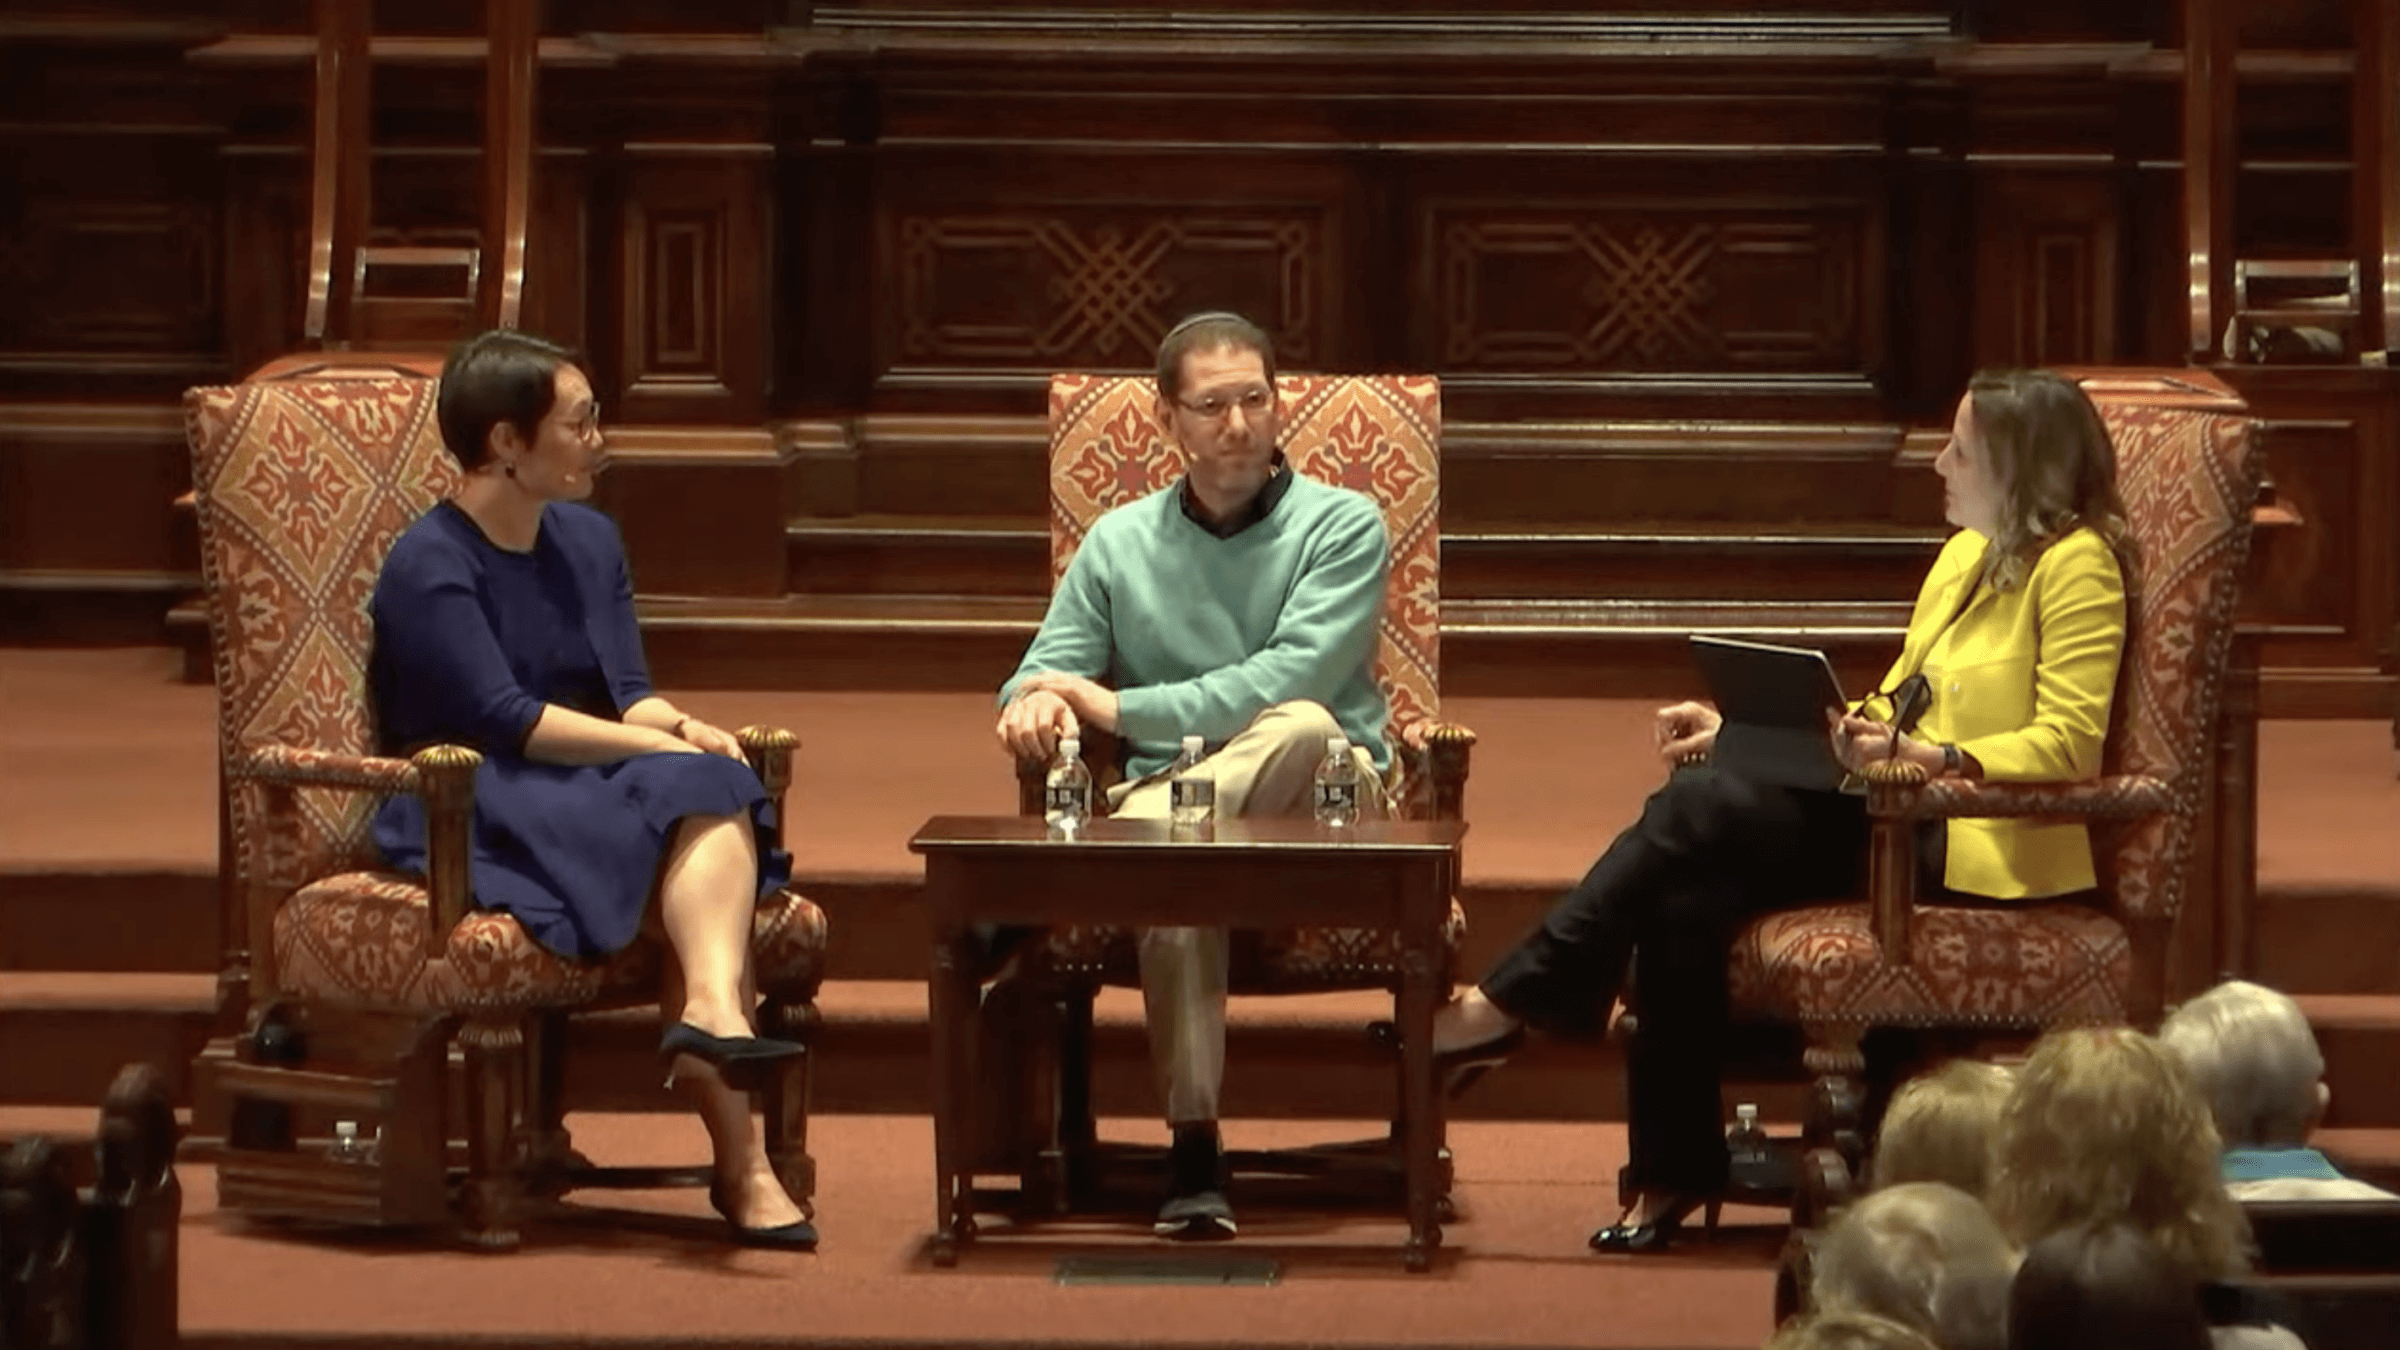 Rabbi Angela Buchdahl, left and Rabbi Charlie Cytron-Walker, center, in a conversation moderated by author Abigail Pogrebin at Manhattan's Central Synagogue on May 3, 2022.